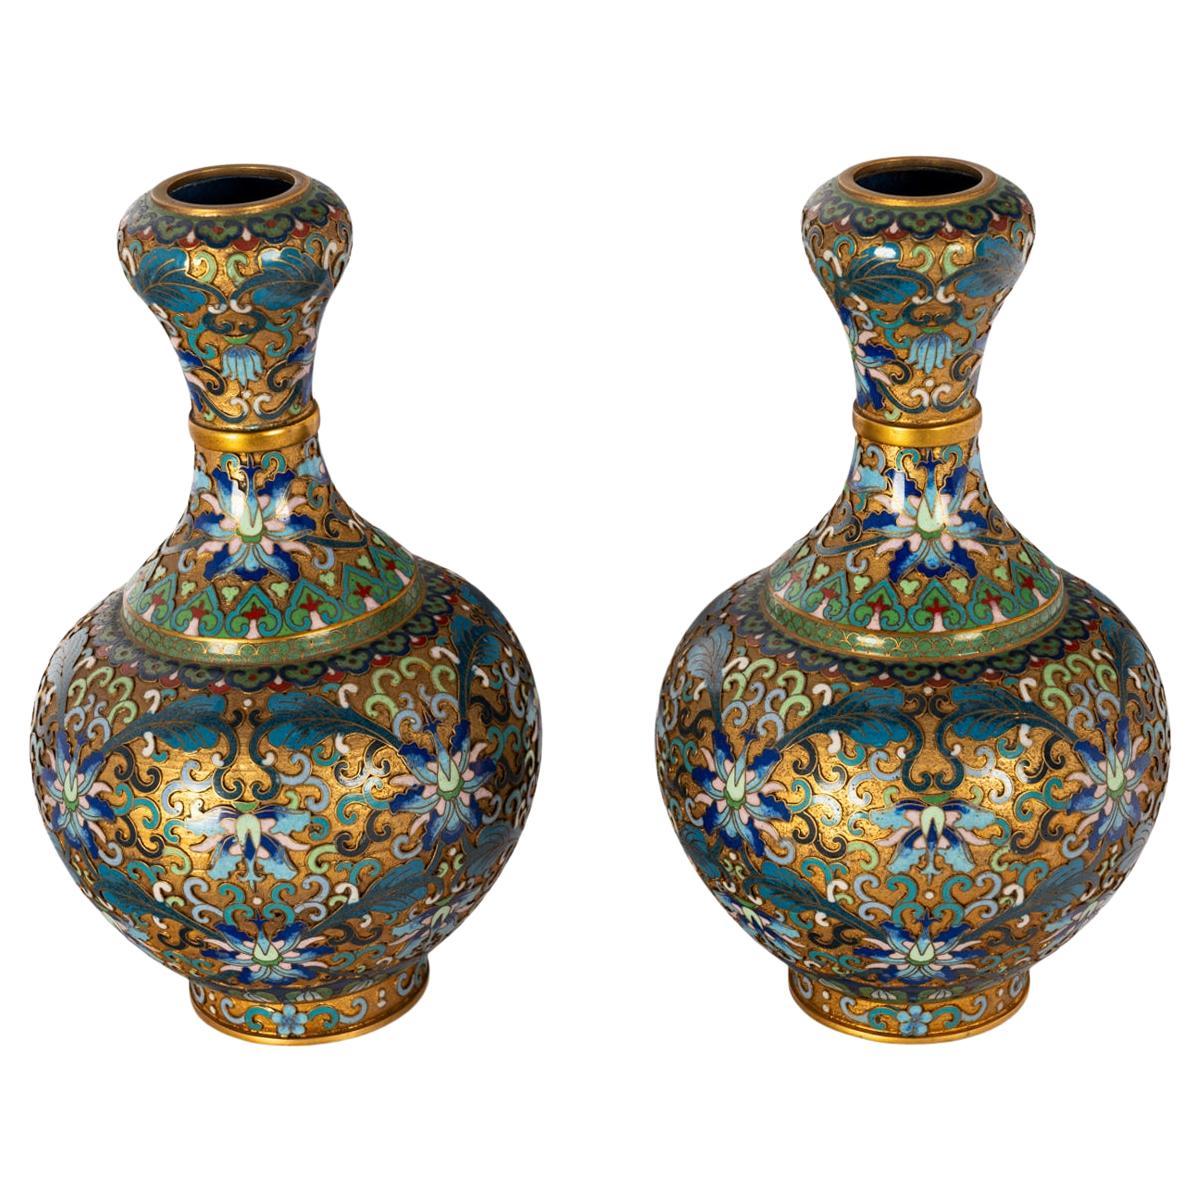 A good pair of late Qing early Republic period 'garlic' neck champlevé & cloisonné vases, circa 1910.
Both vases are lavishly decorated with both cloisonné & champlevé enameled decoration, in a 'thousand flowers' pattern.   
The garlic bulb shaped